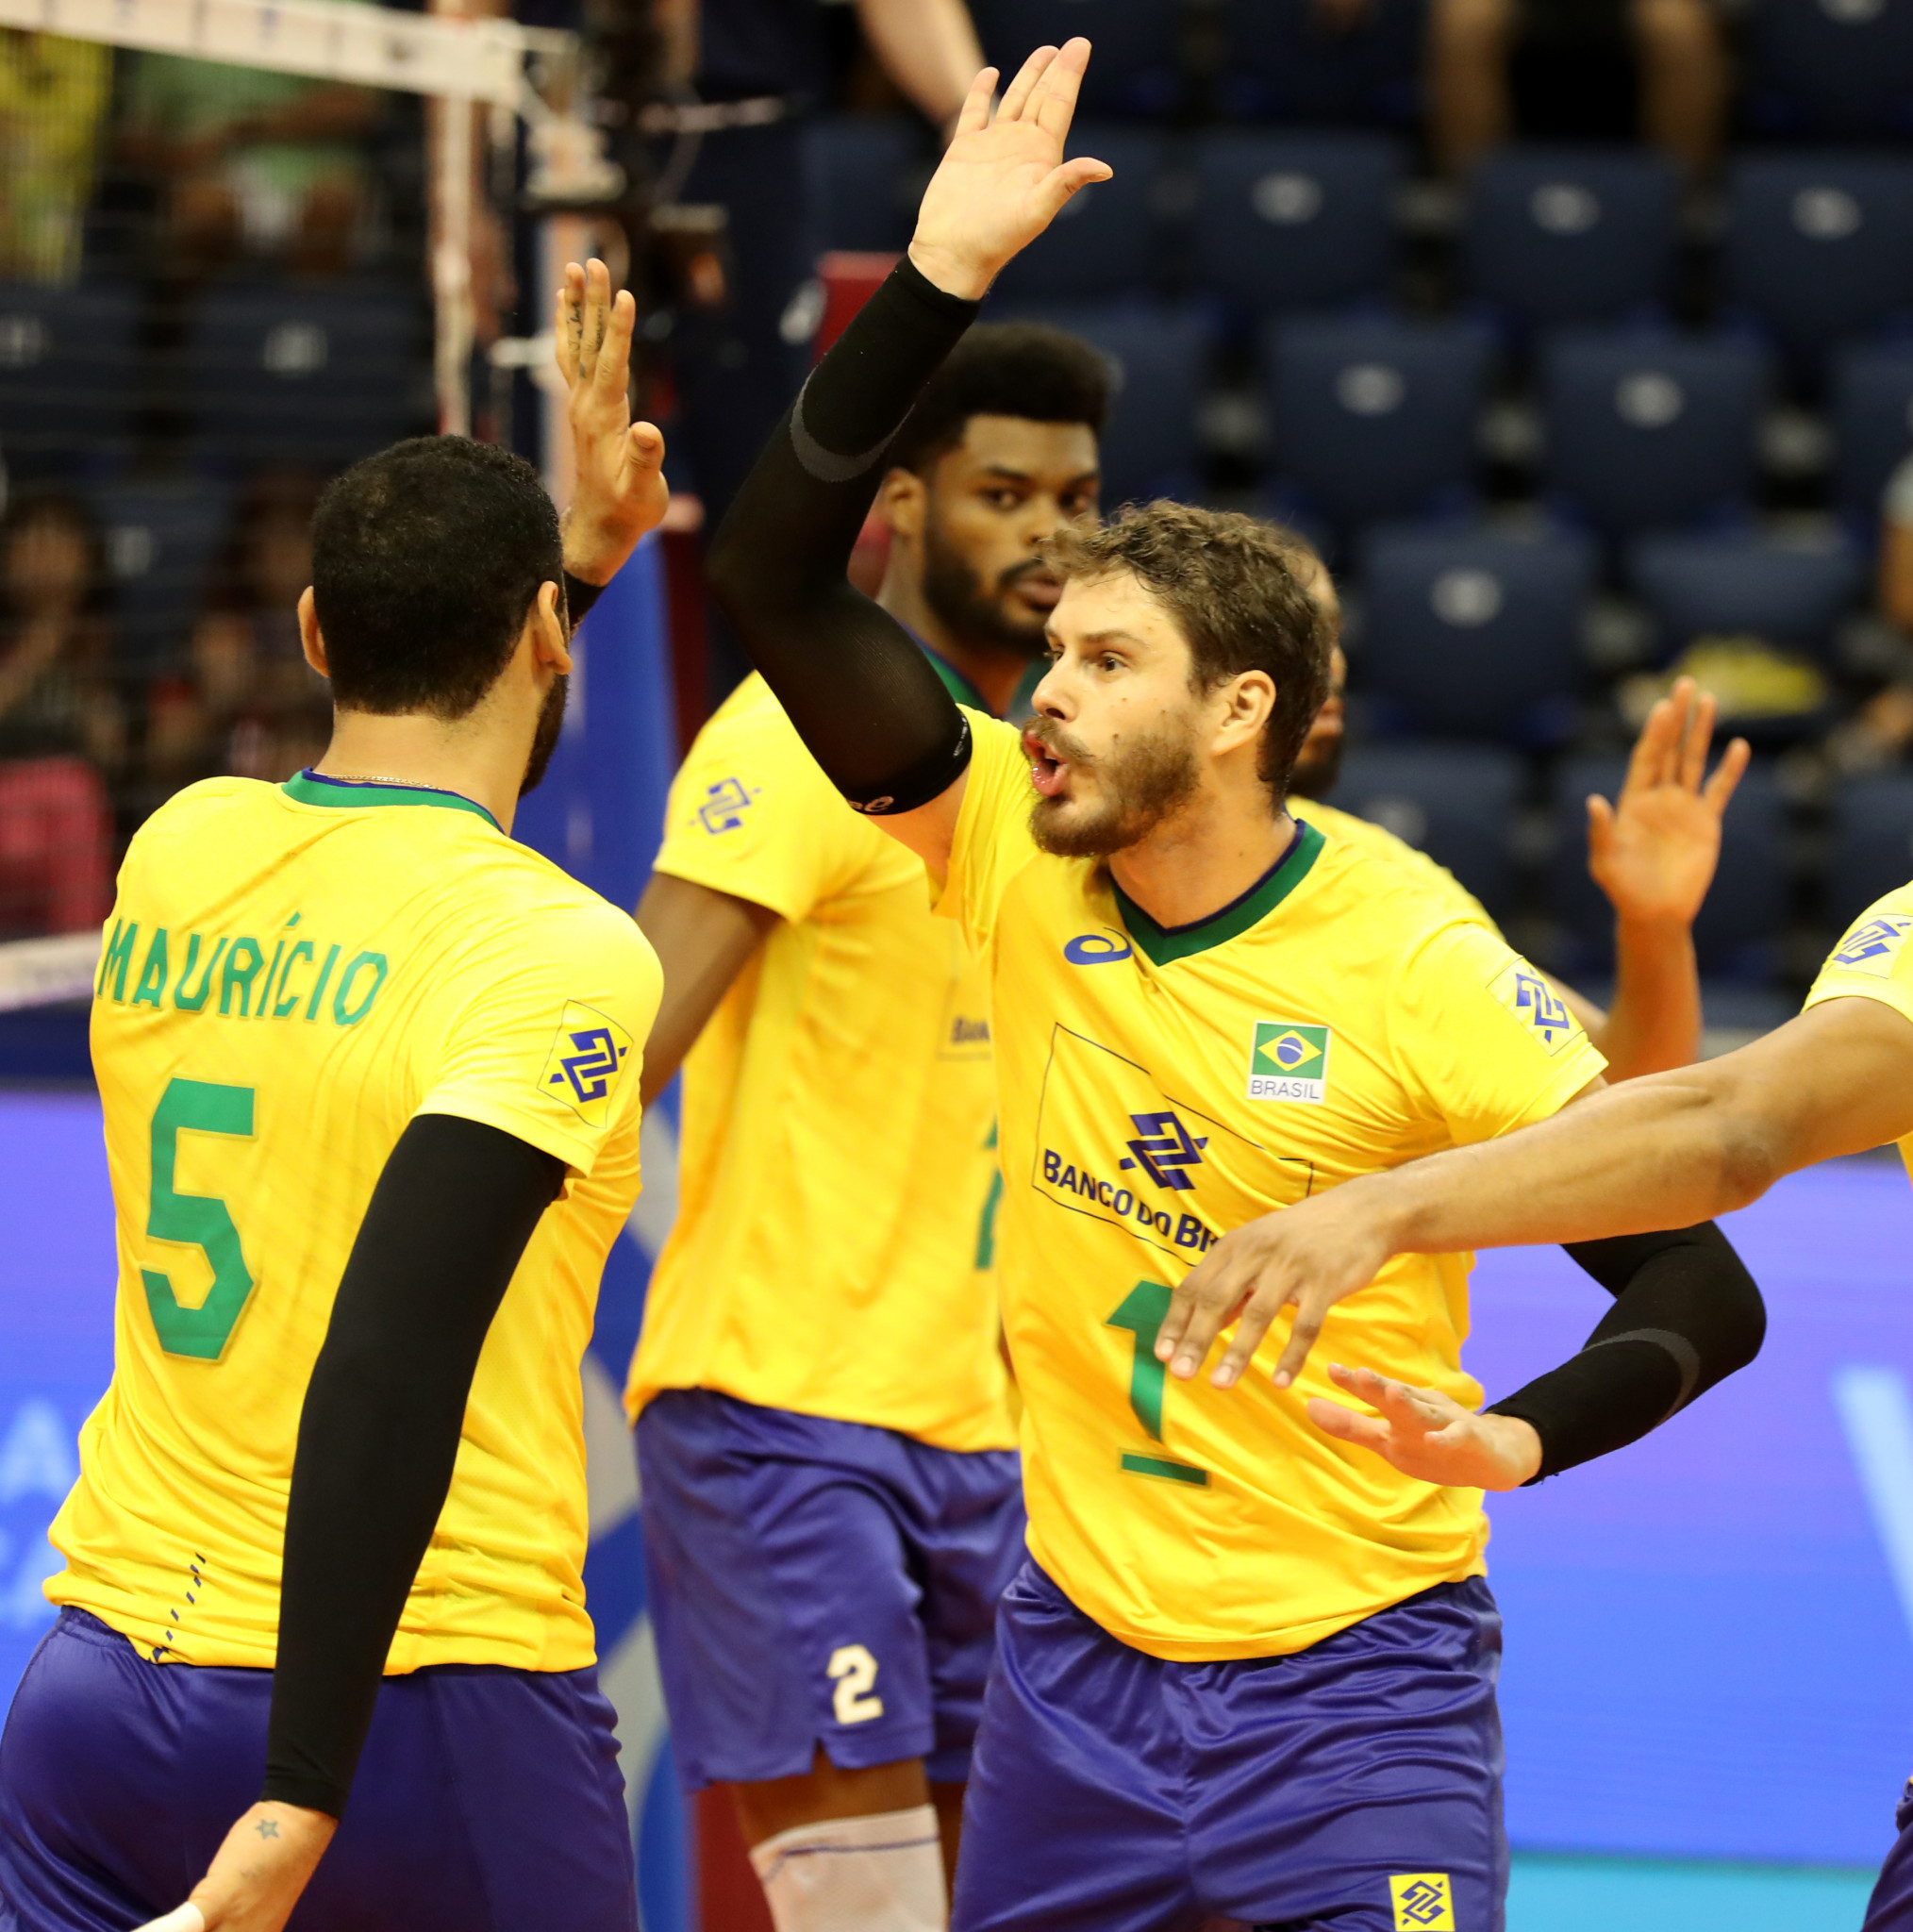 Brazil opened their Pool A account with victory over Puerto Rico ©FIVB